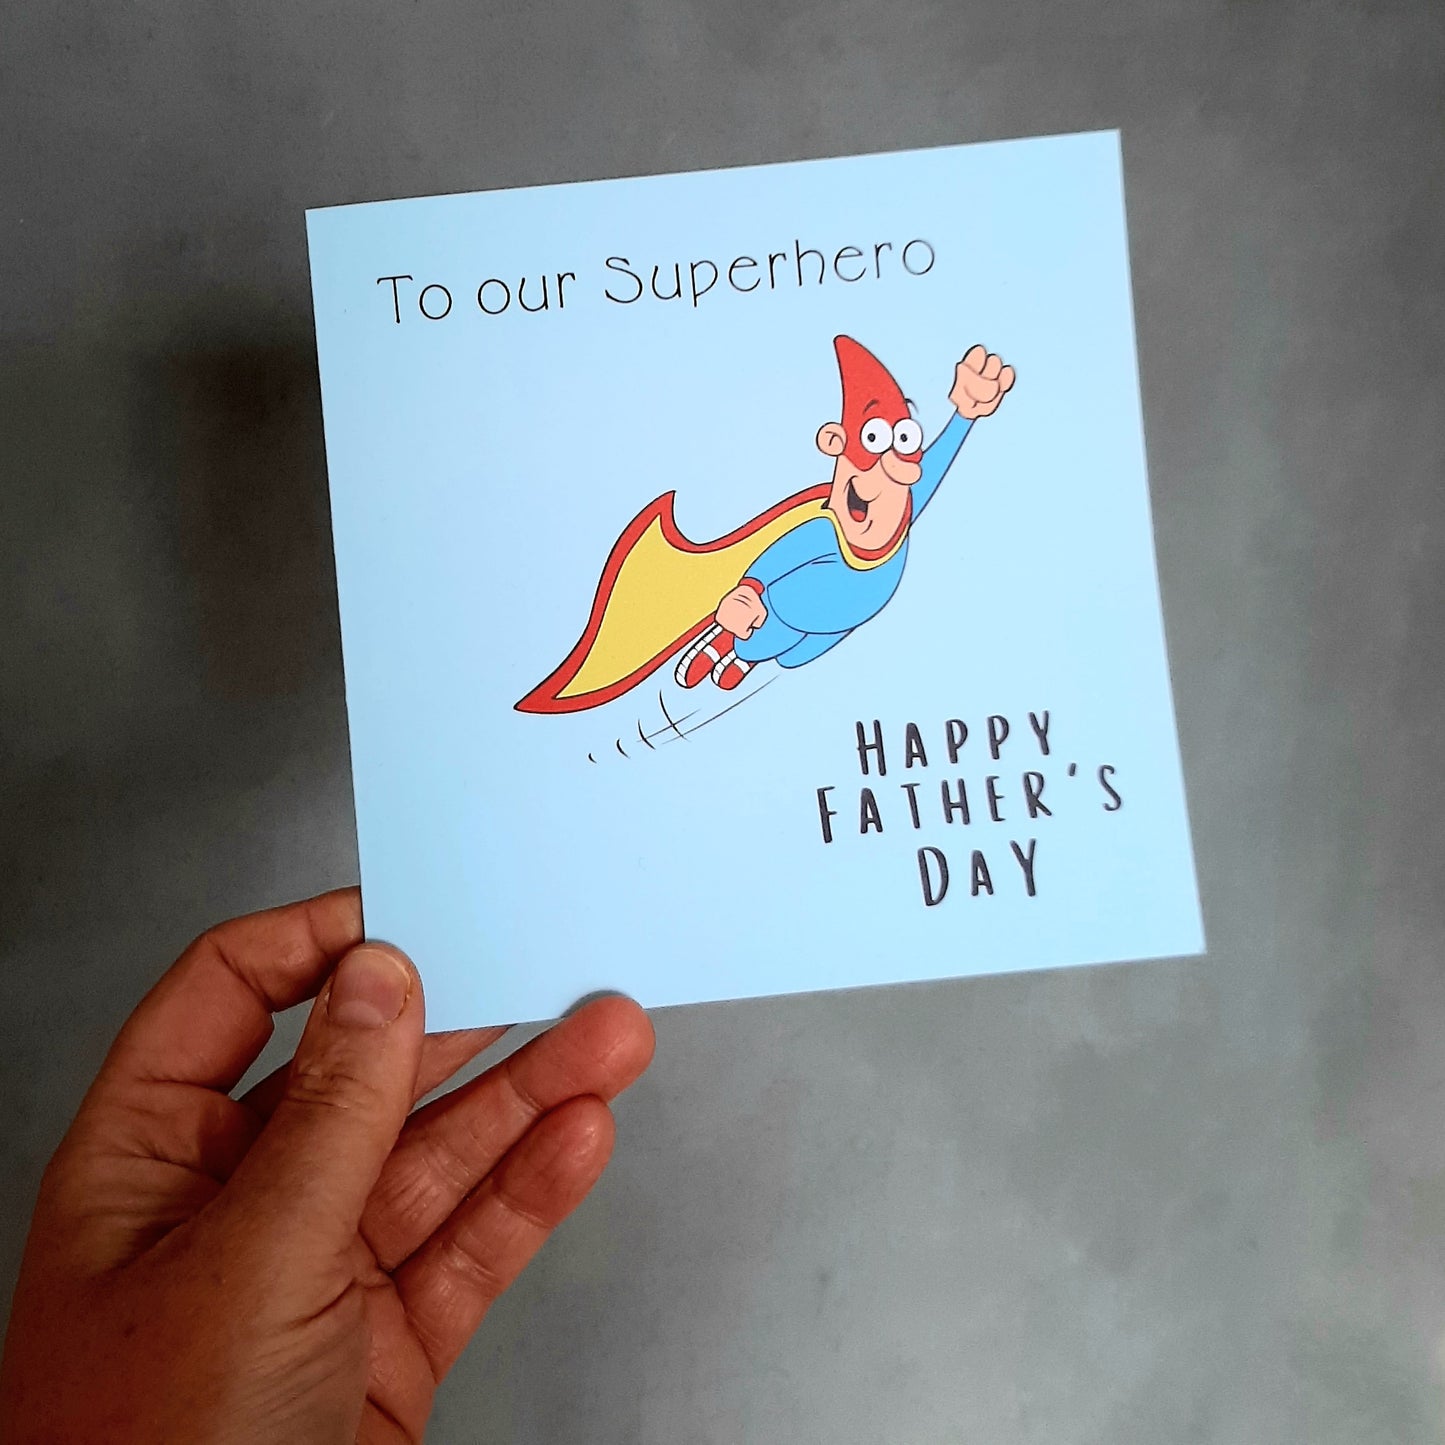 To our Superhero -Happy Father's Day card